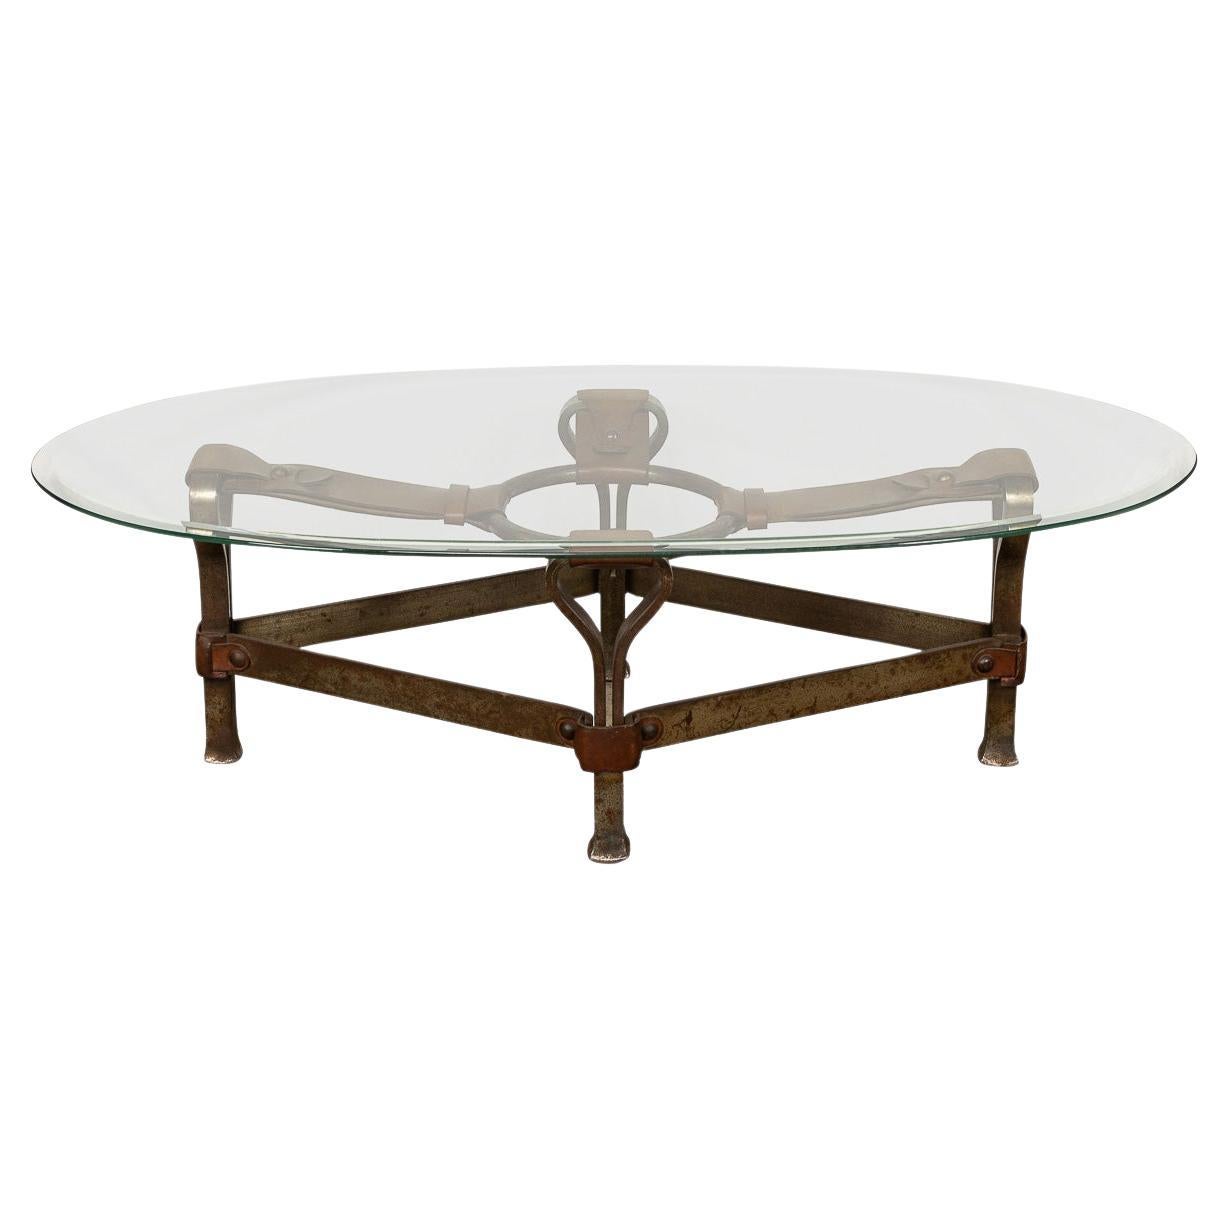 20th Century French Leather and Iron Coffee Table by Jacques Adnet, c.1950